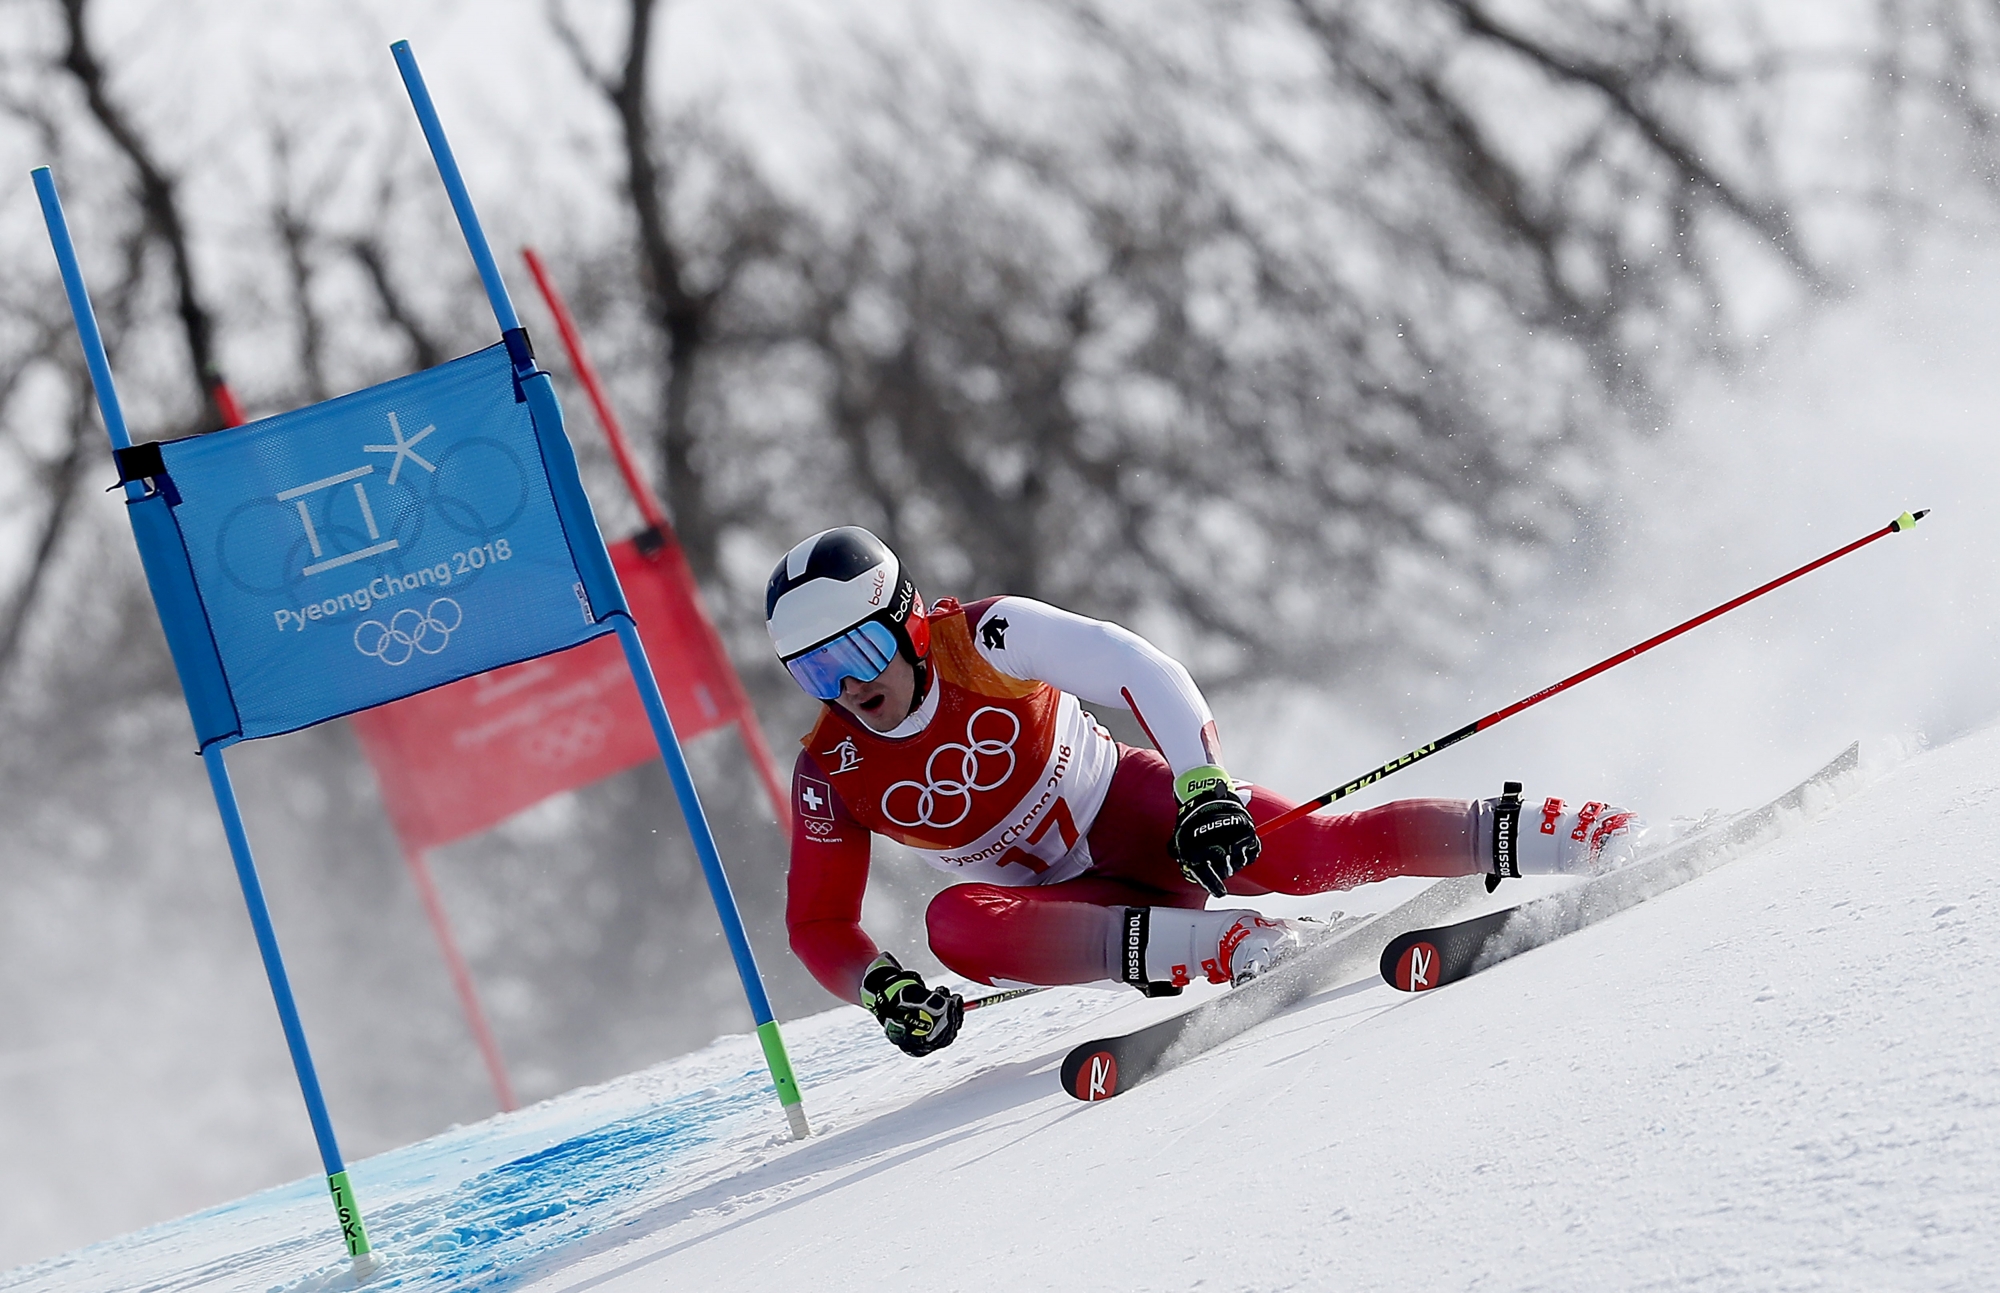 epa06538365 Loic Meillard of Switzerland in action during the Men's Giant Slalom second run at the Yongpyong Alpine Centre during the PyeongChang 2018 Olympic Games, South Korea, 18 February 2018.  EPA/GUILLAUME HORCAJUELO SOUTH KOREA PYEONGCHANG 2018 OLYMPIC GAMES